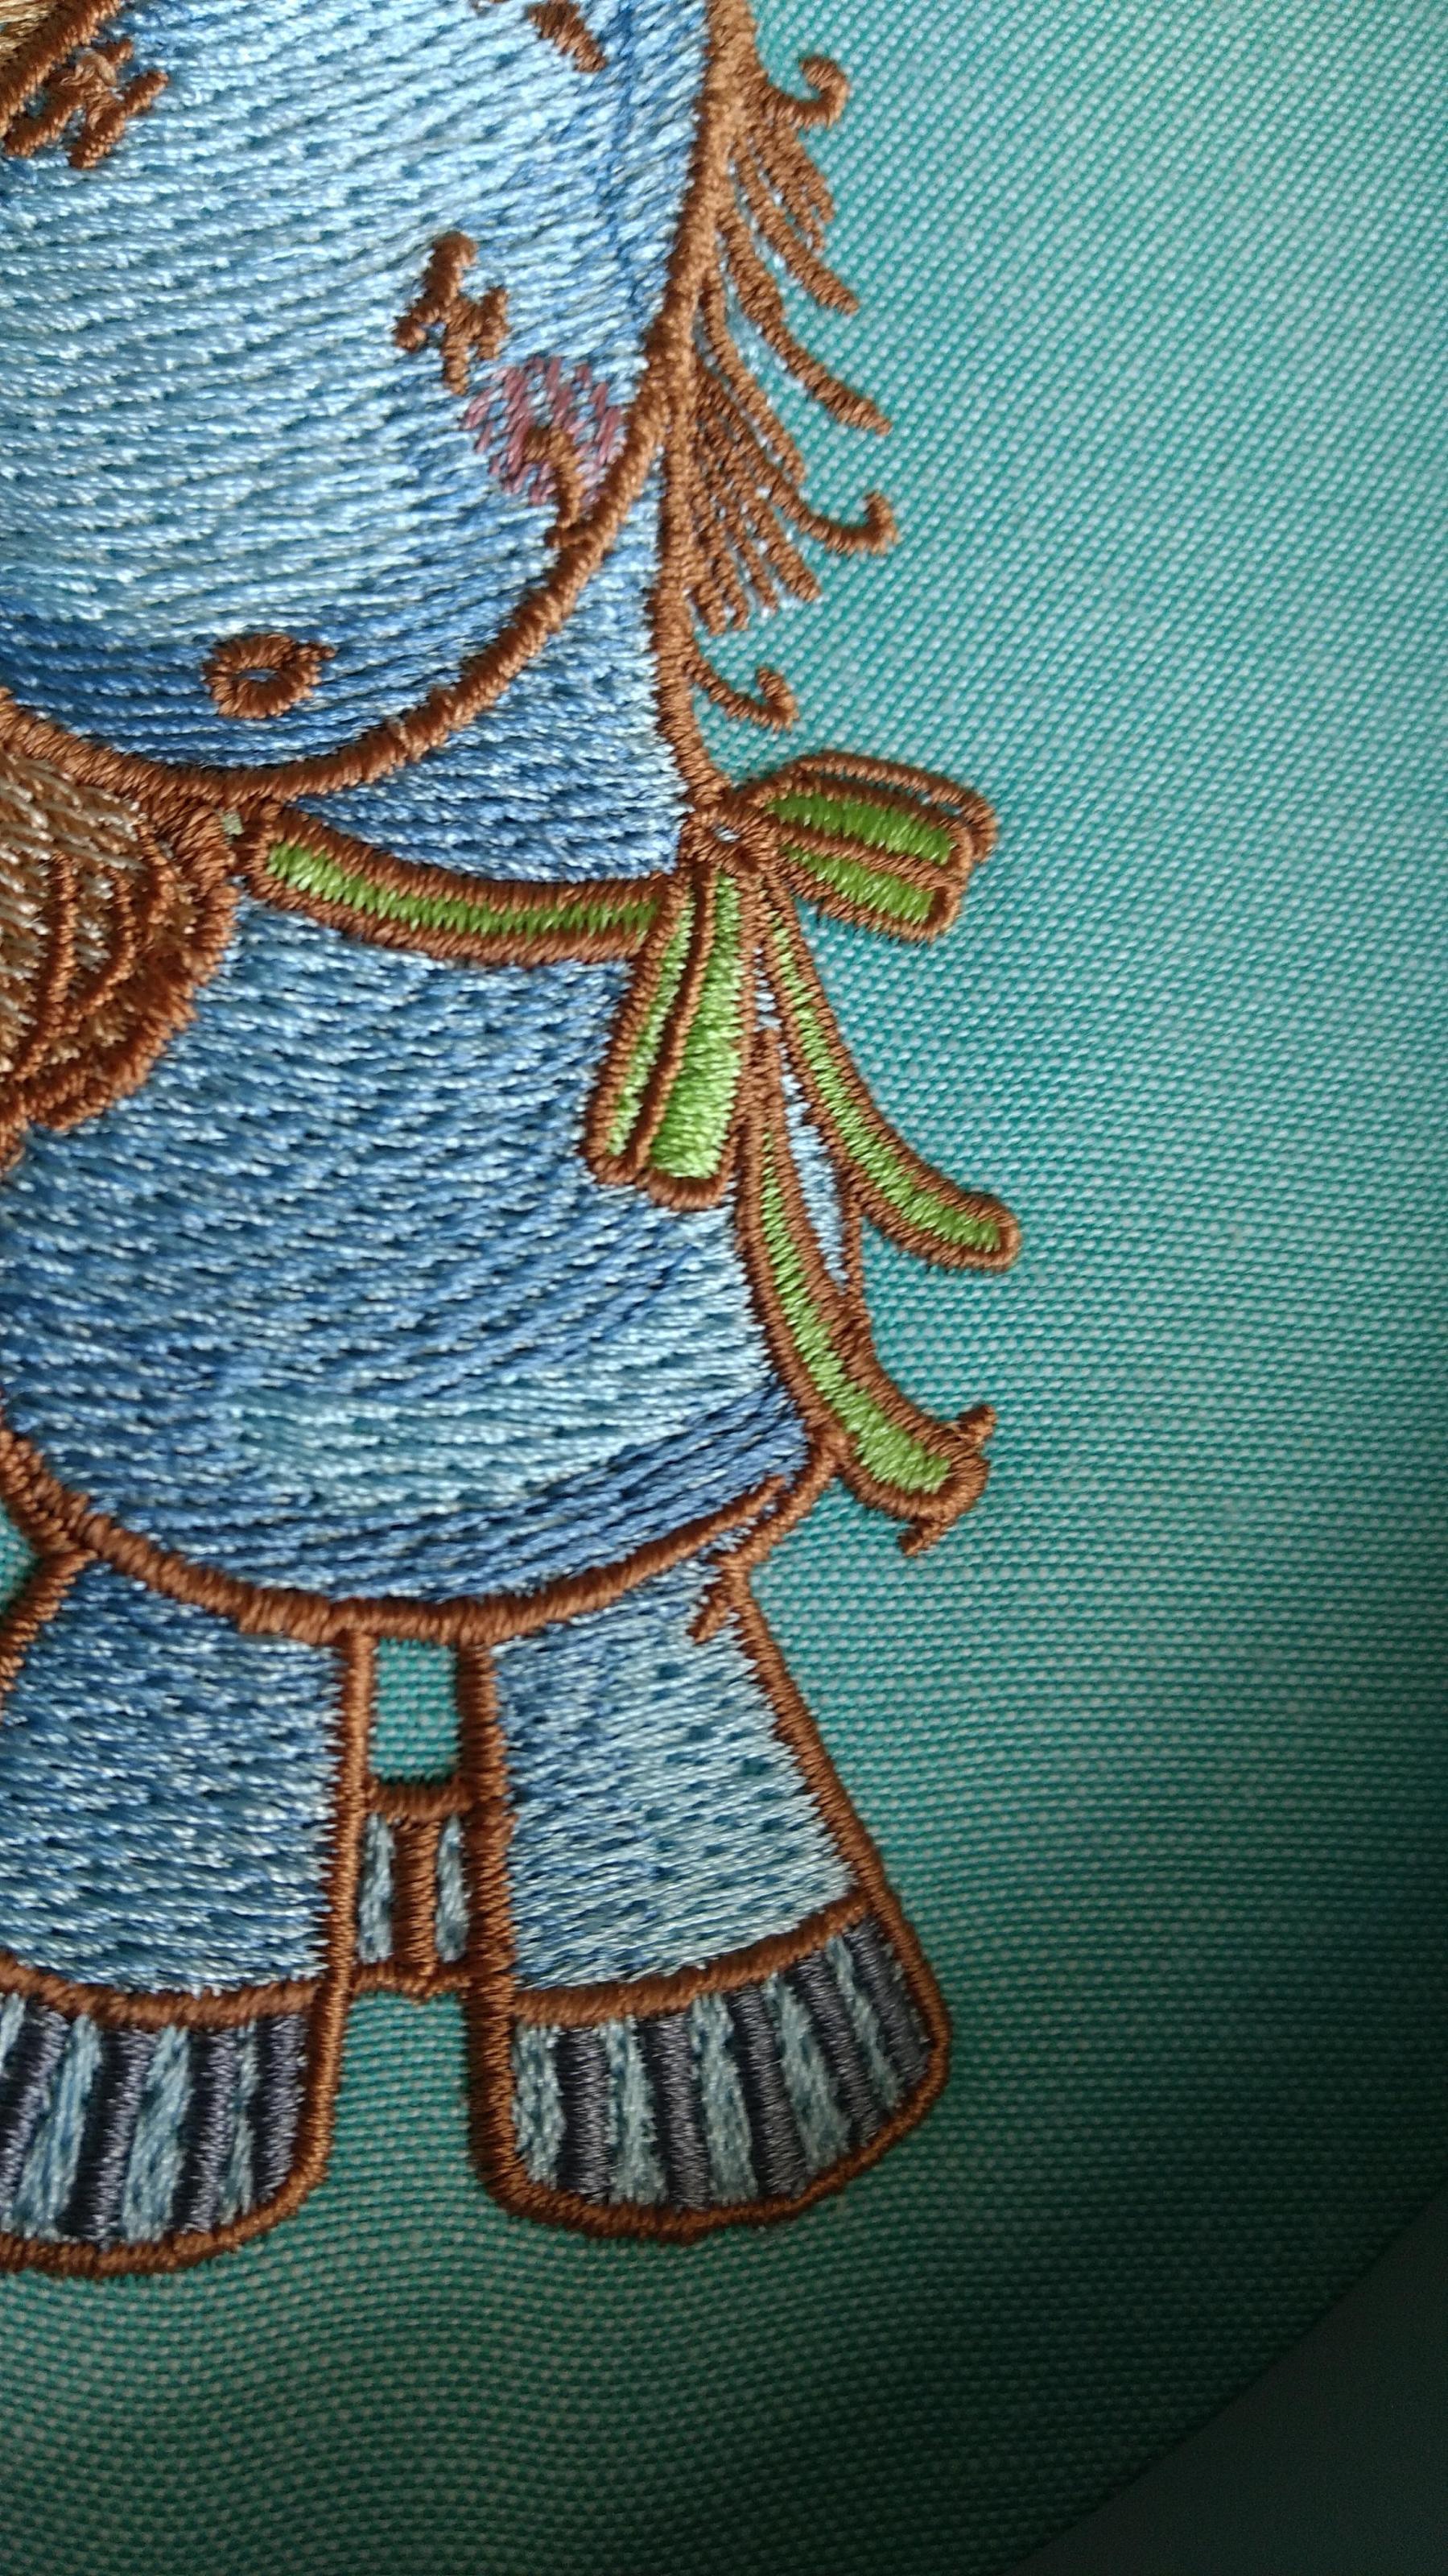 Pony embroidery in hoop embroidery process